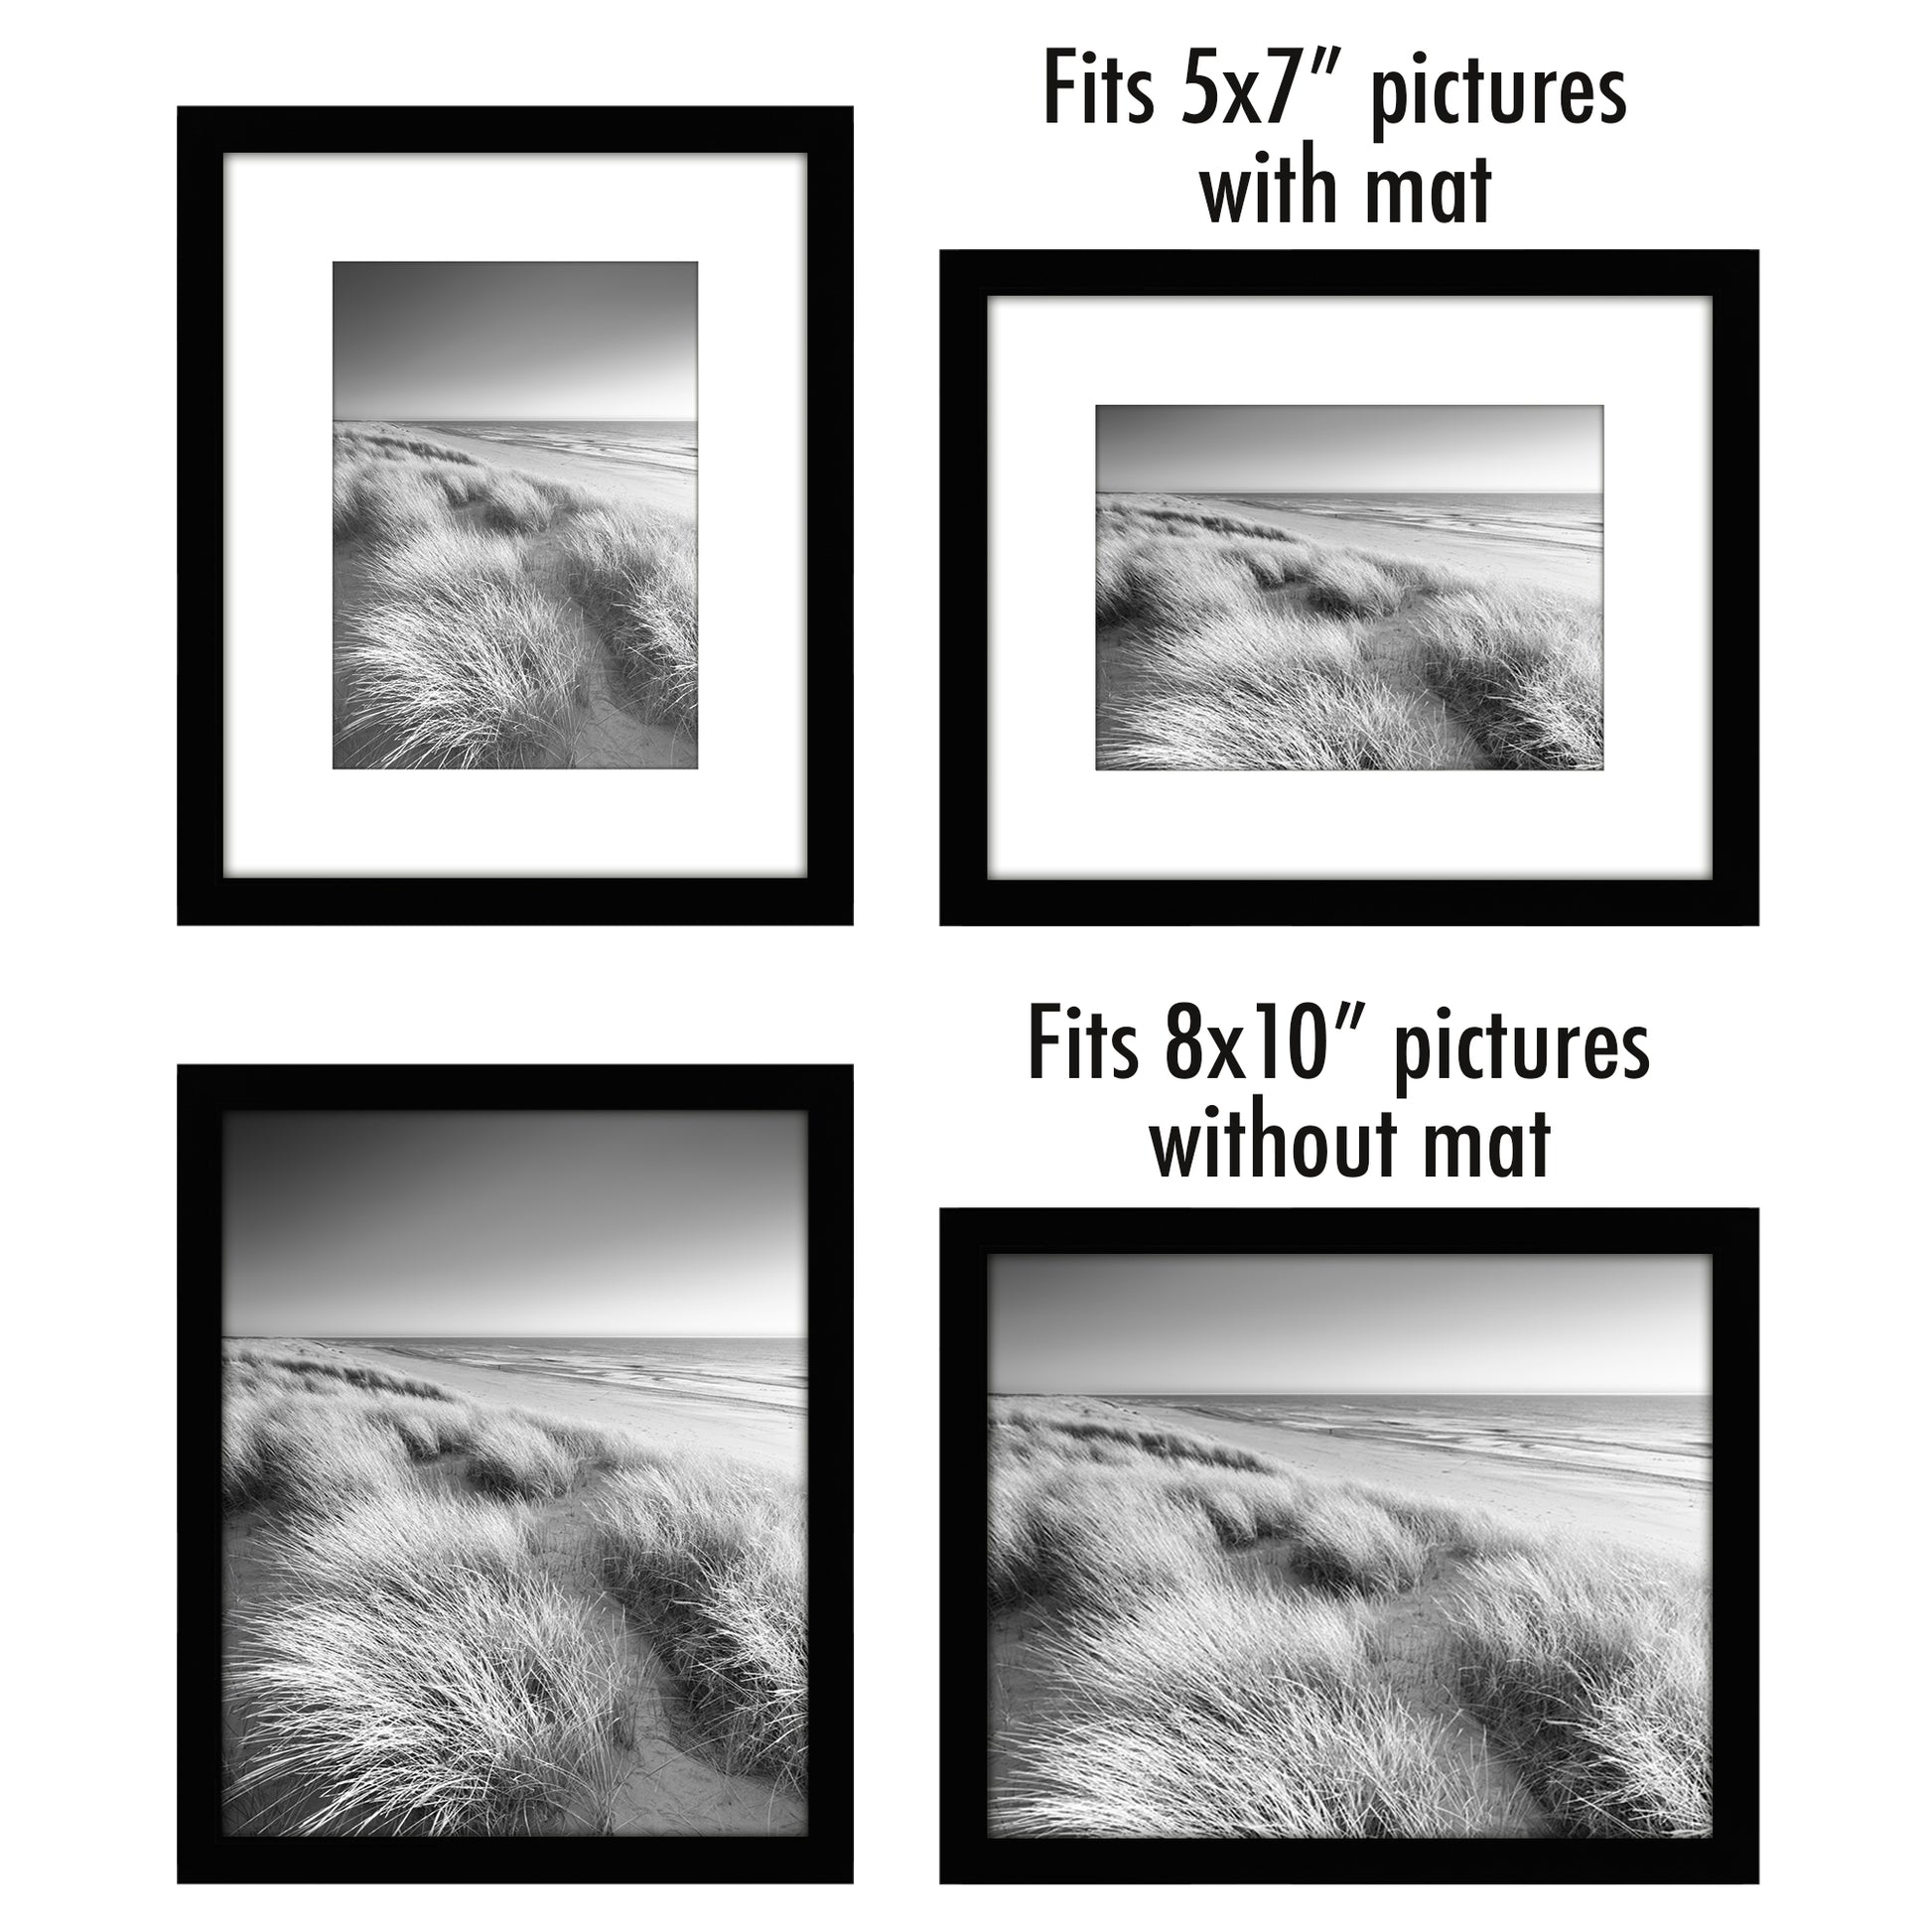 Americanflat 5 Pack of 8x10 Frames with 5x7 Mat - Plexiglass Cover - White, Size: 8 inch x 10 inch